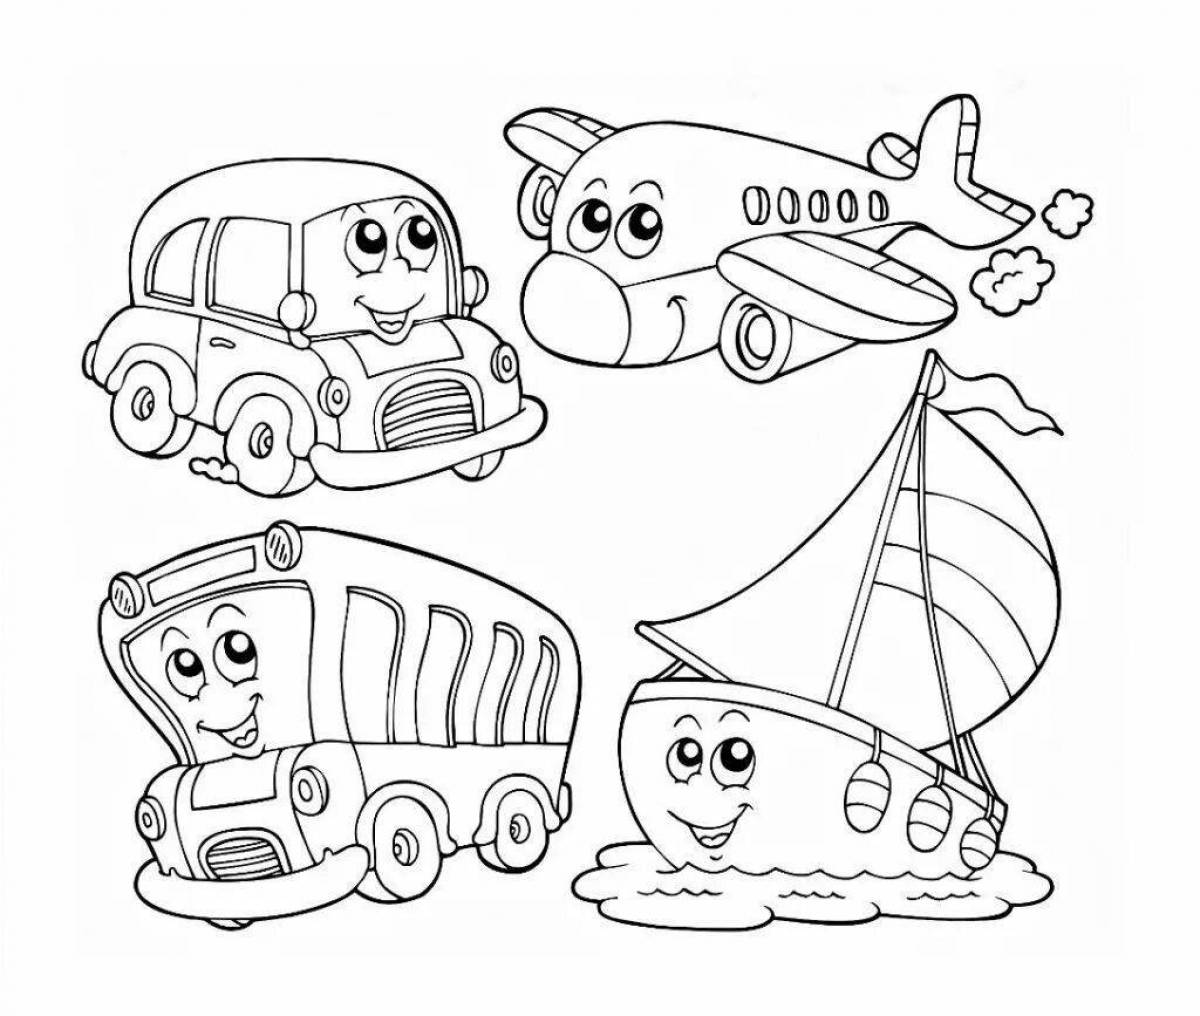 Colorful wonderland big coloring page for boys